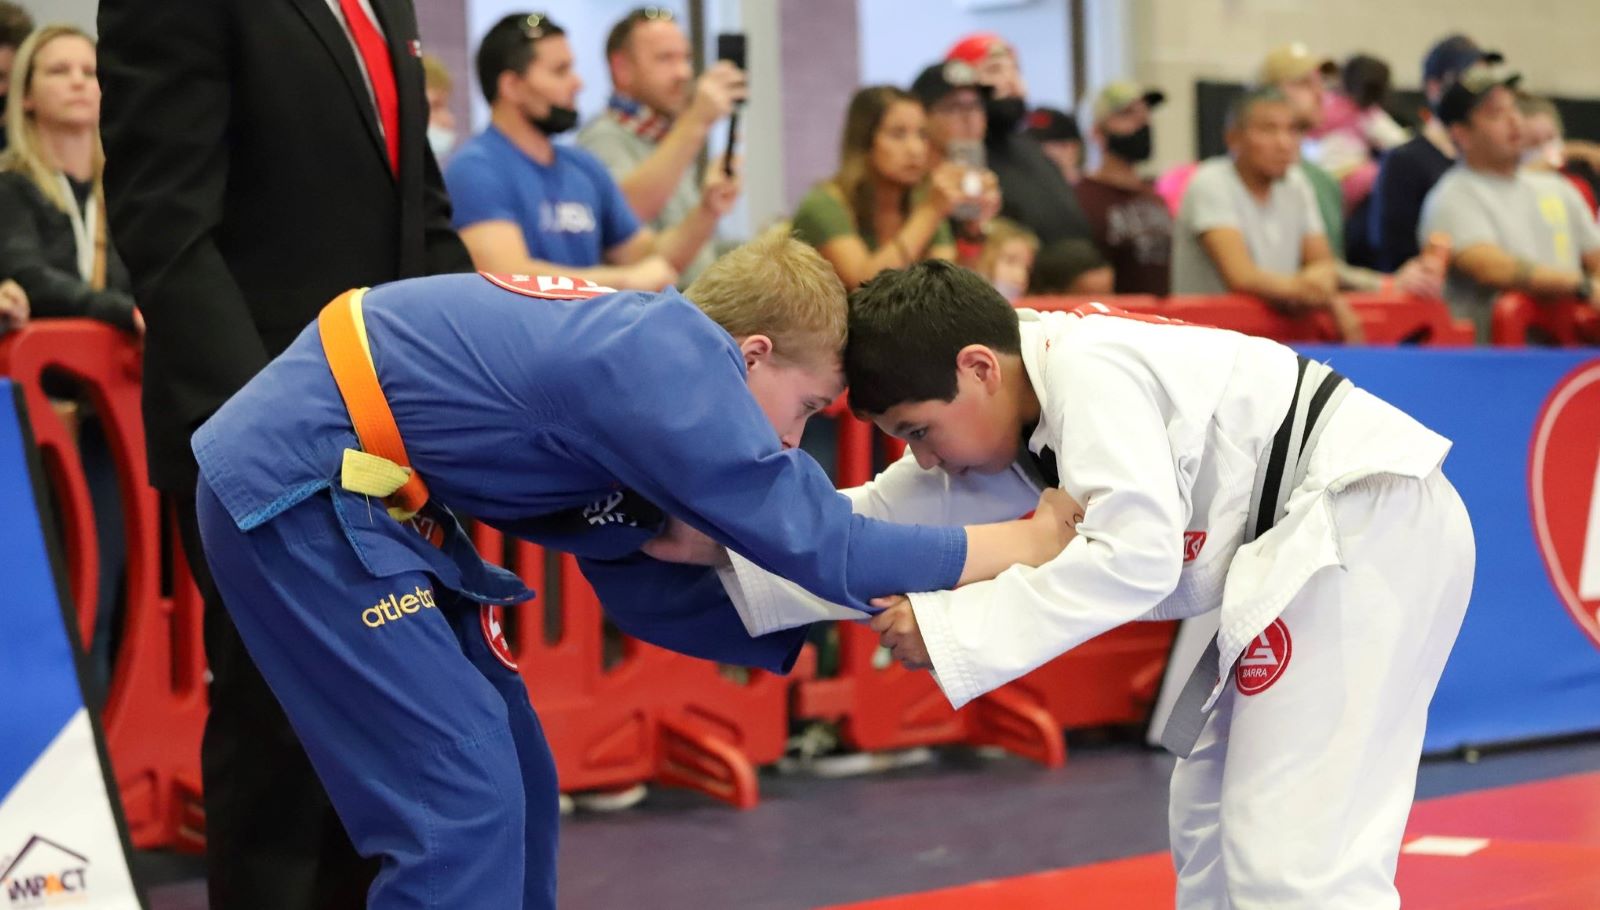 Martial Arts Training for Kids Near Me Union, MO | Union, MO Kids Martial Arts | Gracie Barra Washington